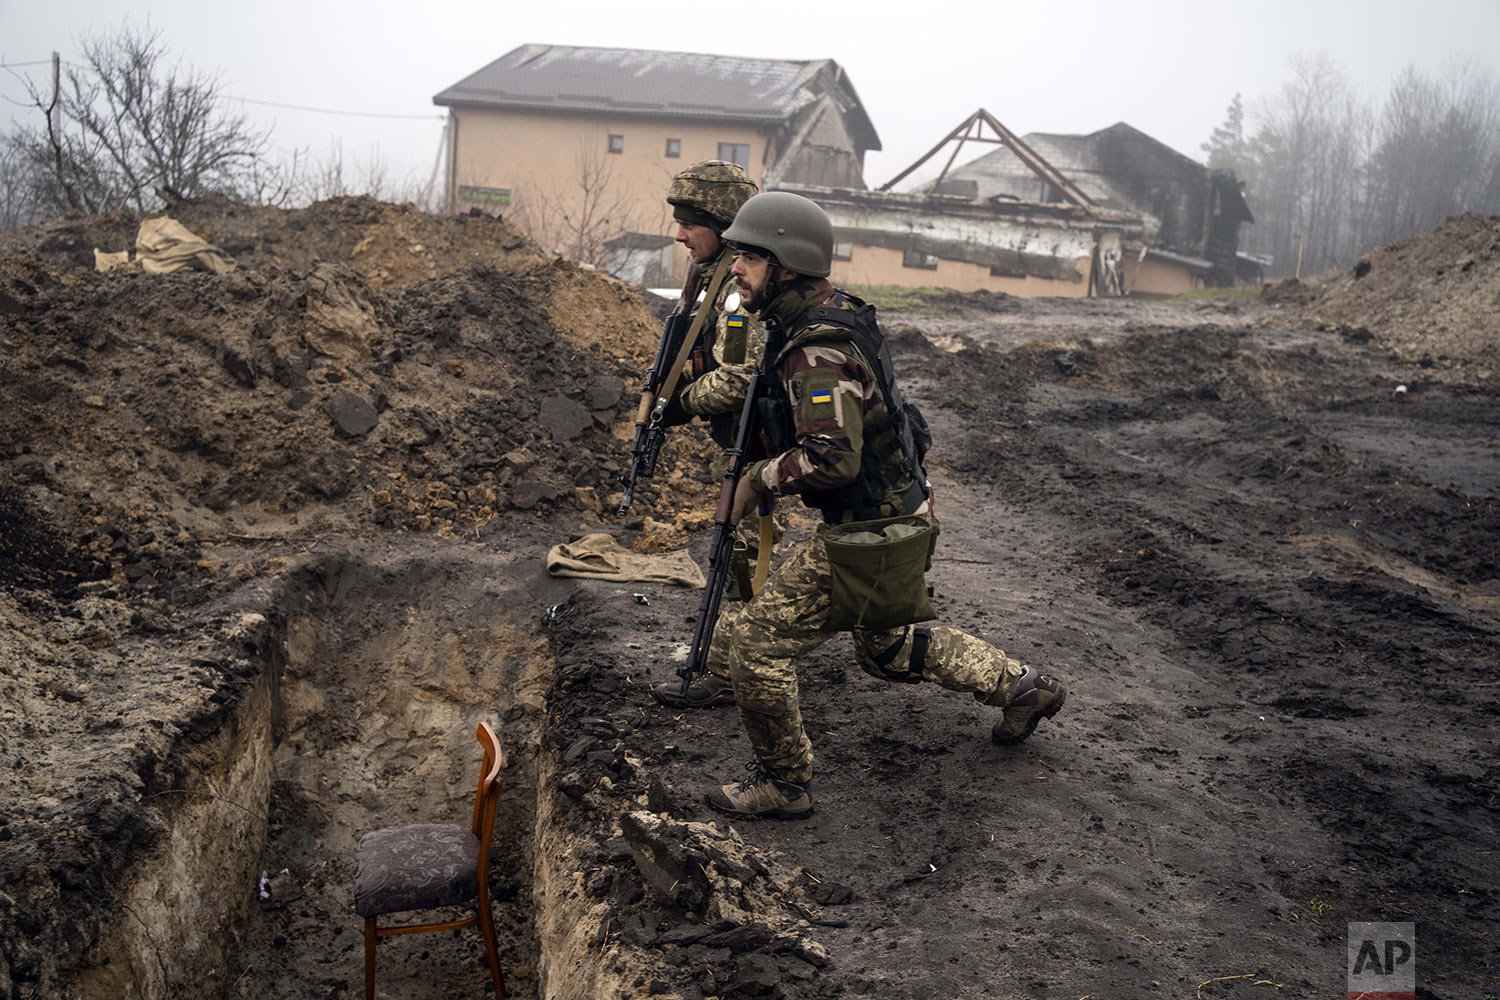  Ukrainian soldiers approach a trench used by Russian soldiers as they retake the area on the outskirts of Kyiv, Ukraine, Friday, April 1, 2022. (AP Photo/Rodrigo Abd) 